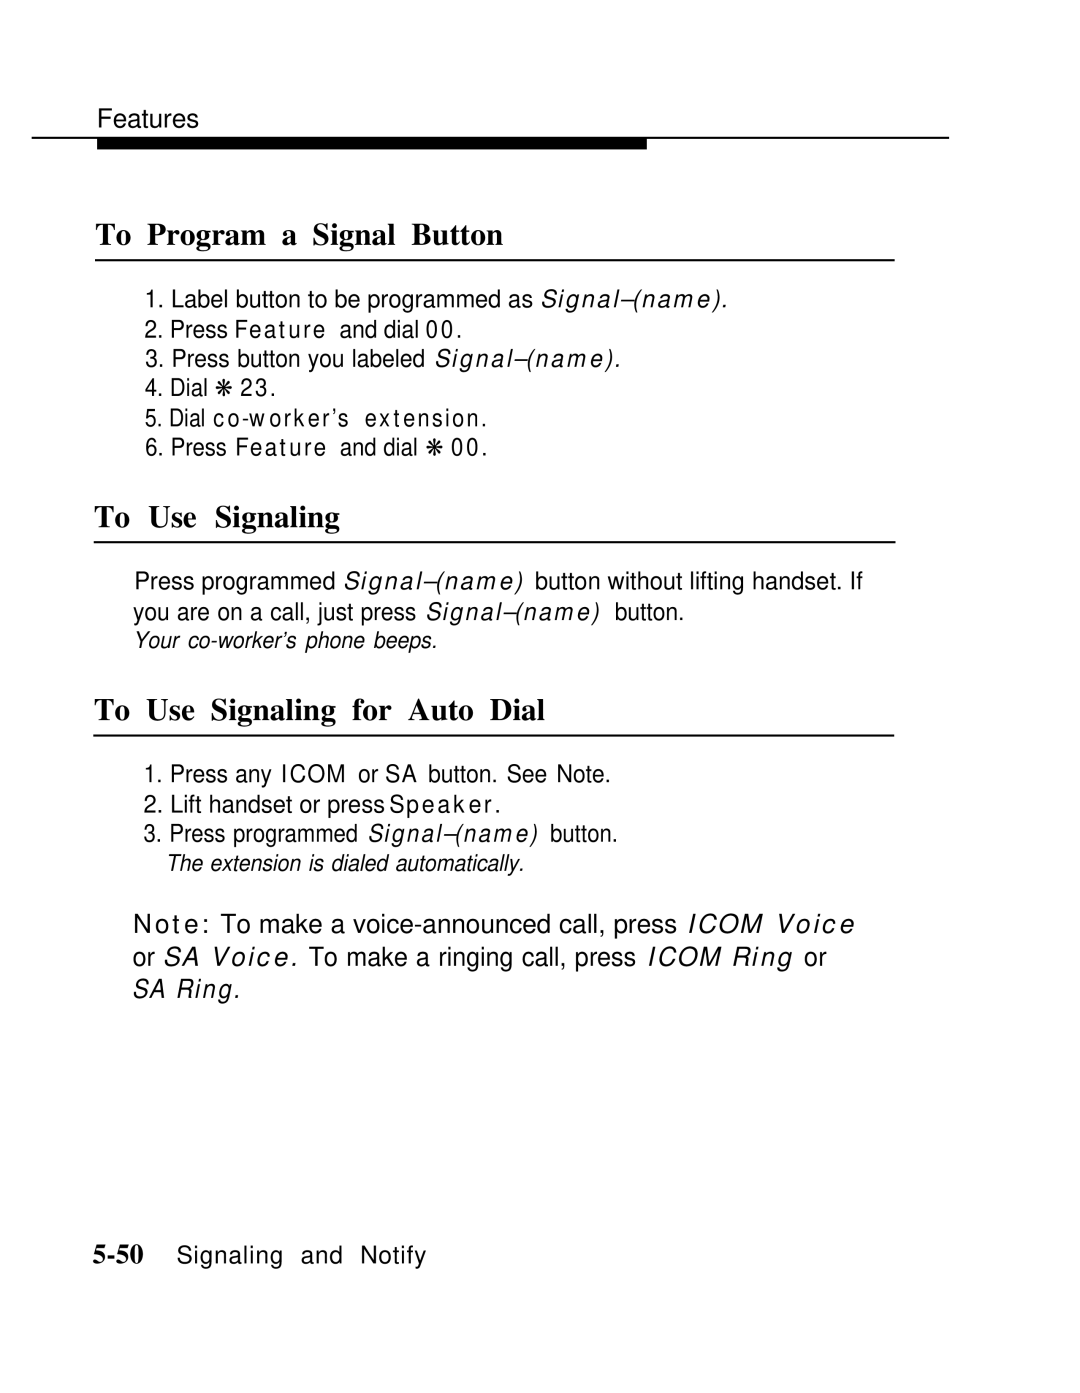 AT&T MLX-10 manual To Program a Signal Button, To Use Signaling for Auto Dial 